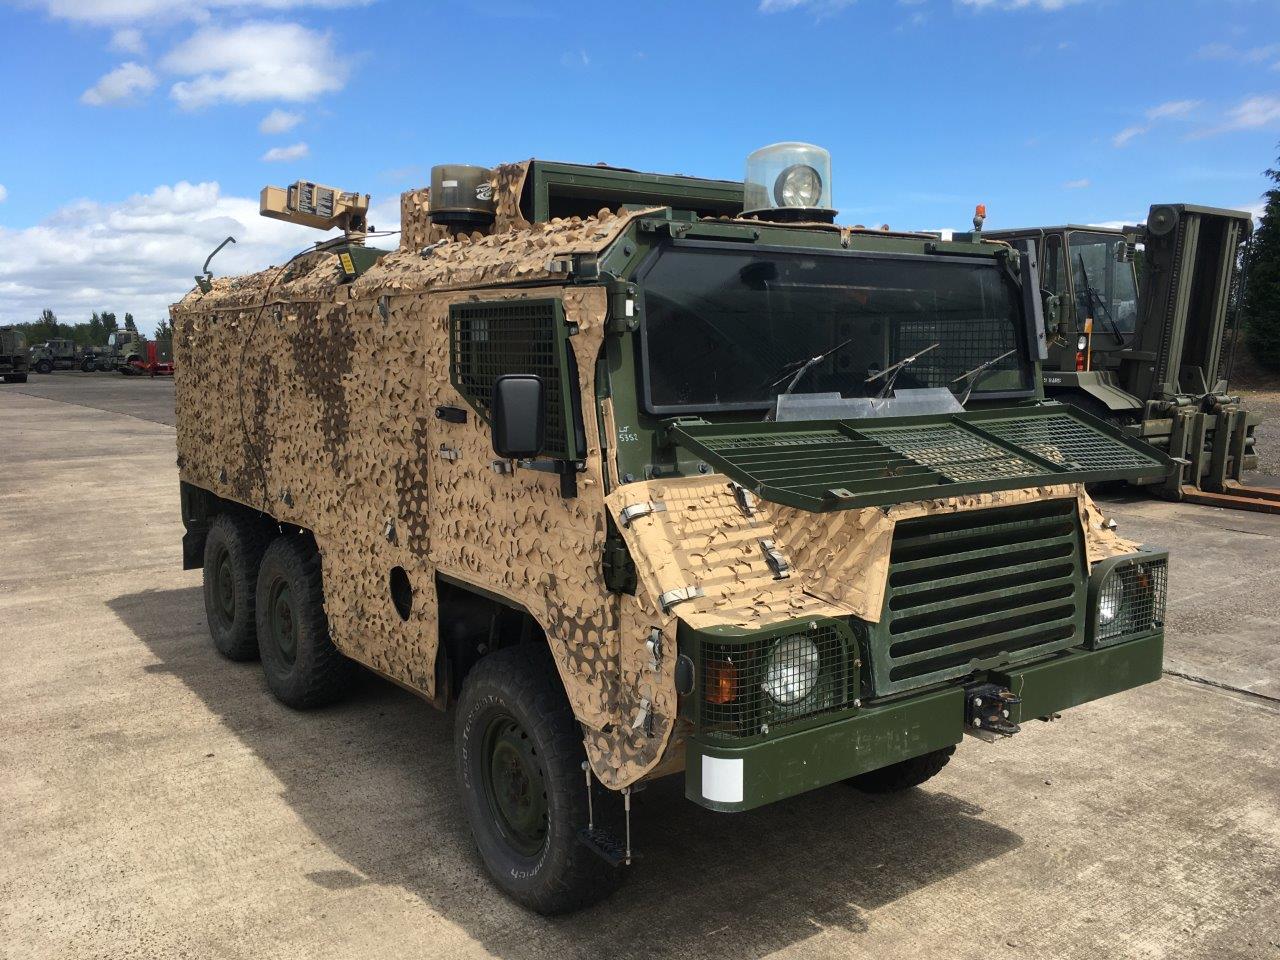 Pinzgauer Vector 718 6×6 Armoured Patrol Vehicles - Govsales of ex military vehicles for sale, mod surplus